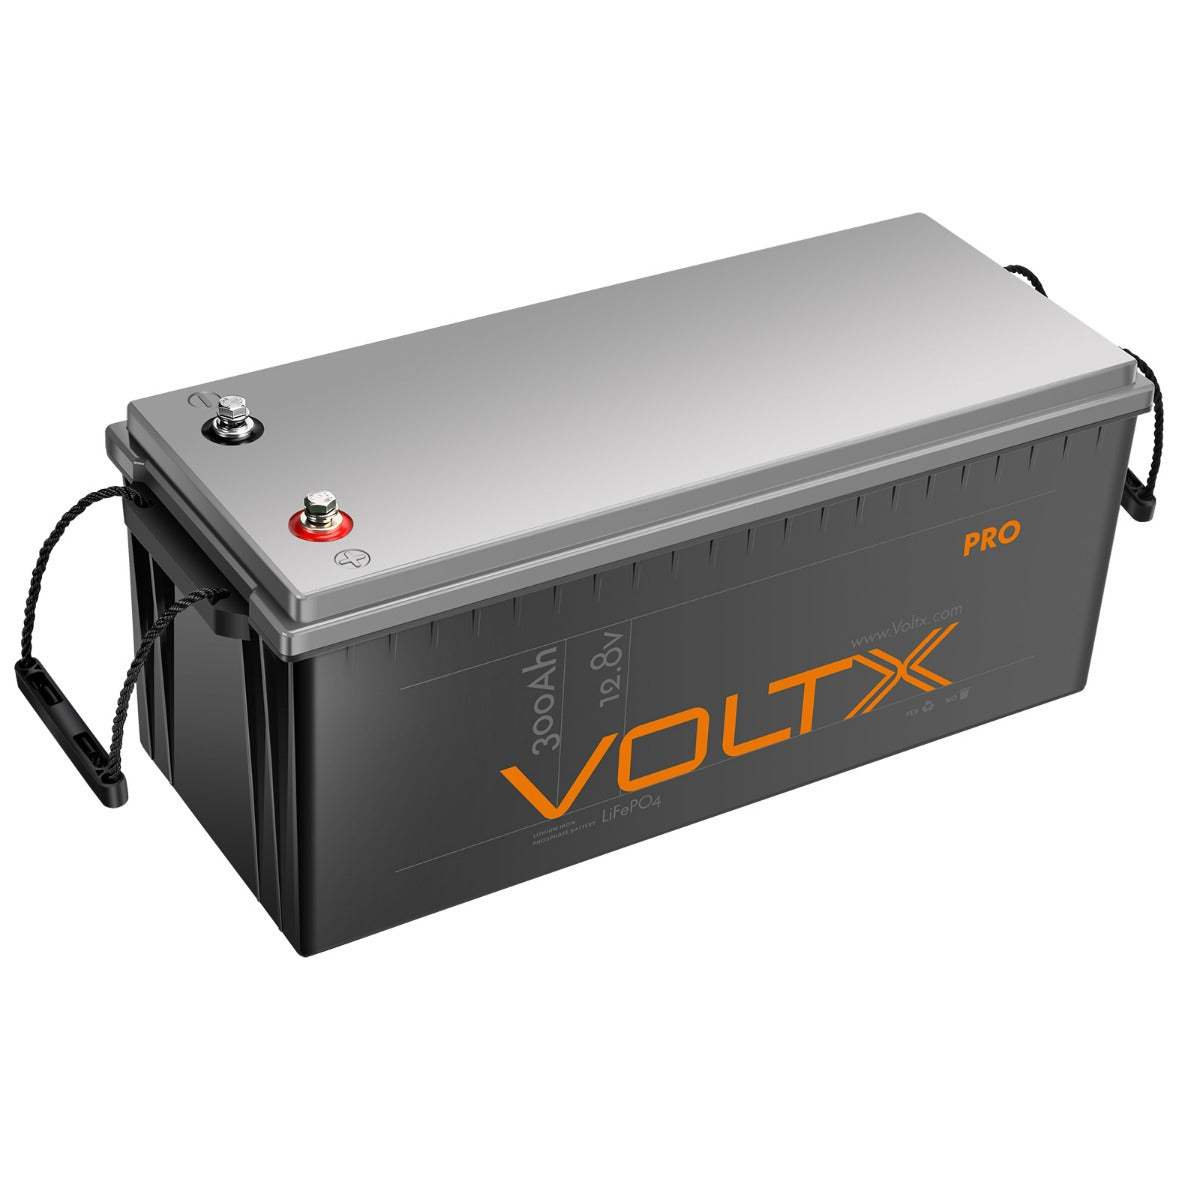 VoltX 300Ah LiFePO4 Battery with LCD Display